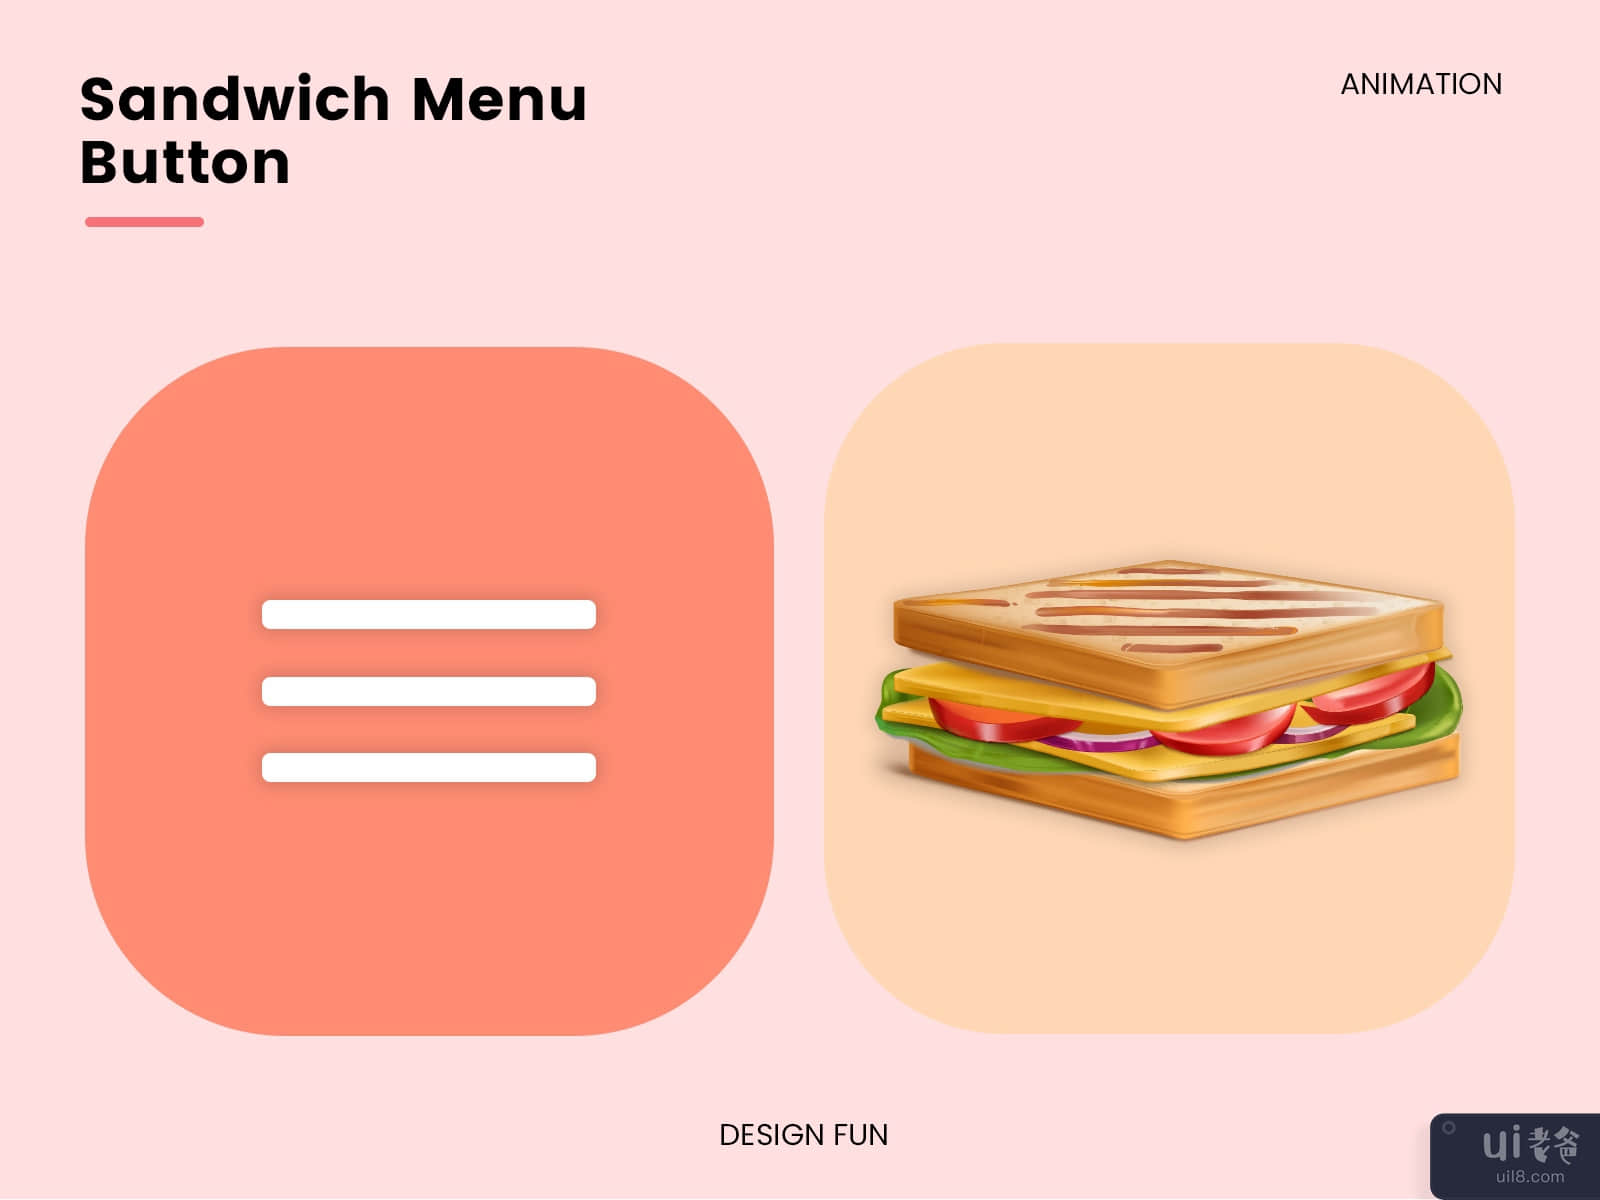 Sandwich Menu Button Design for Mobile and Landing Page